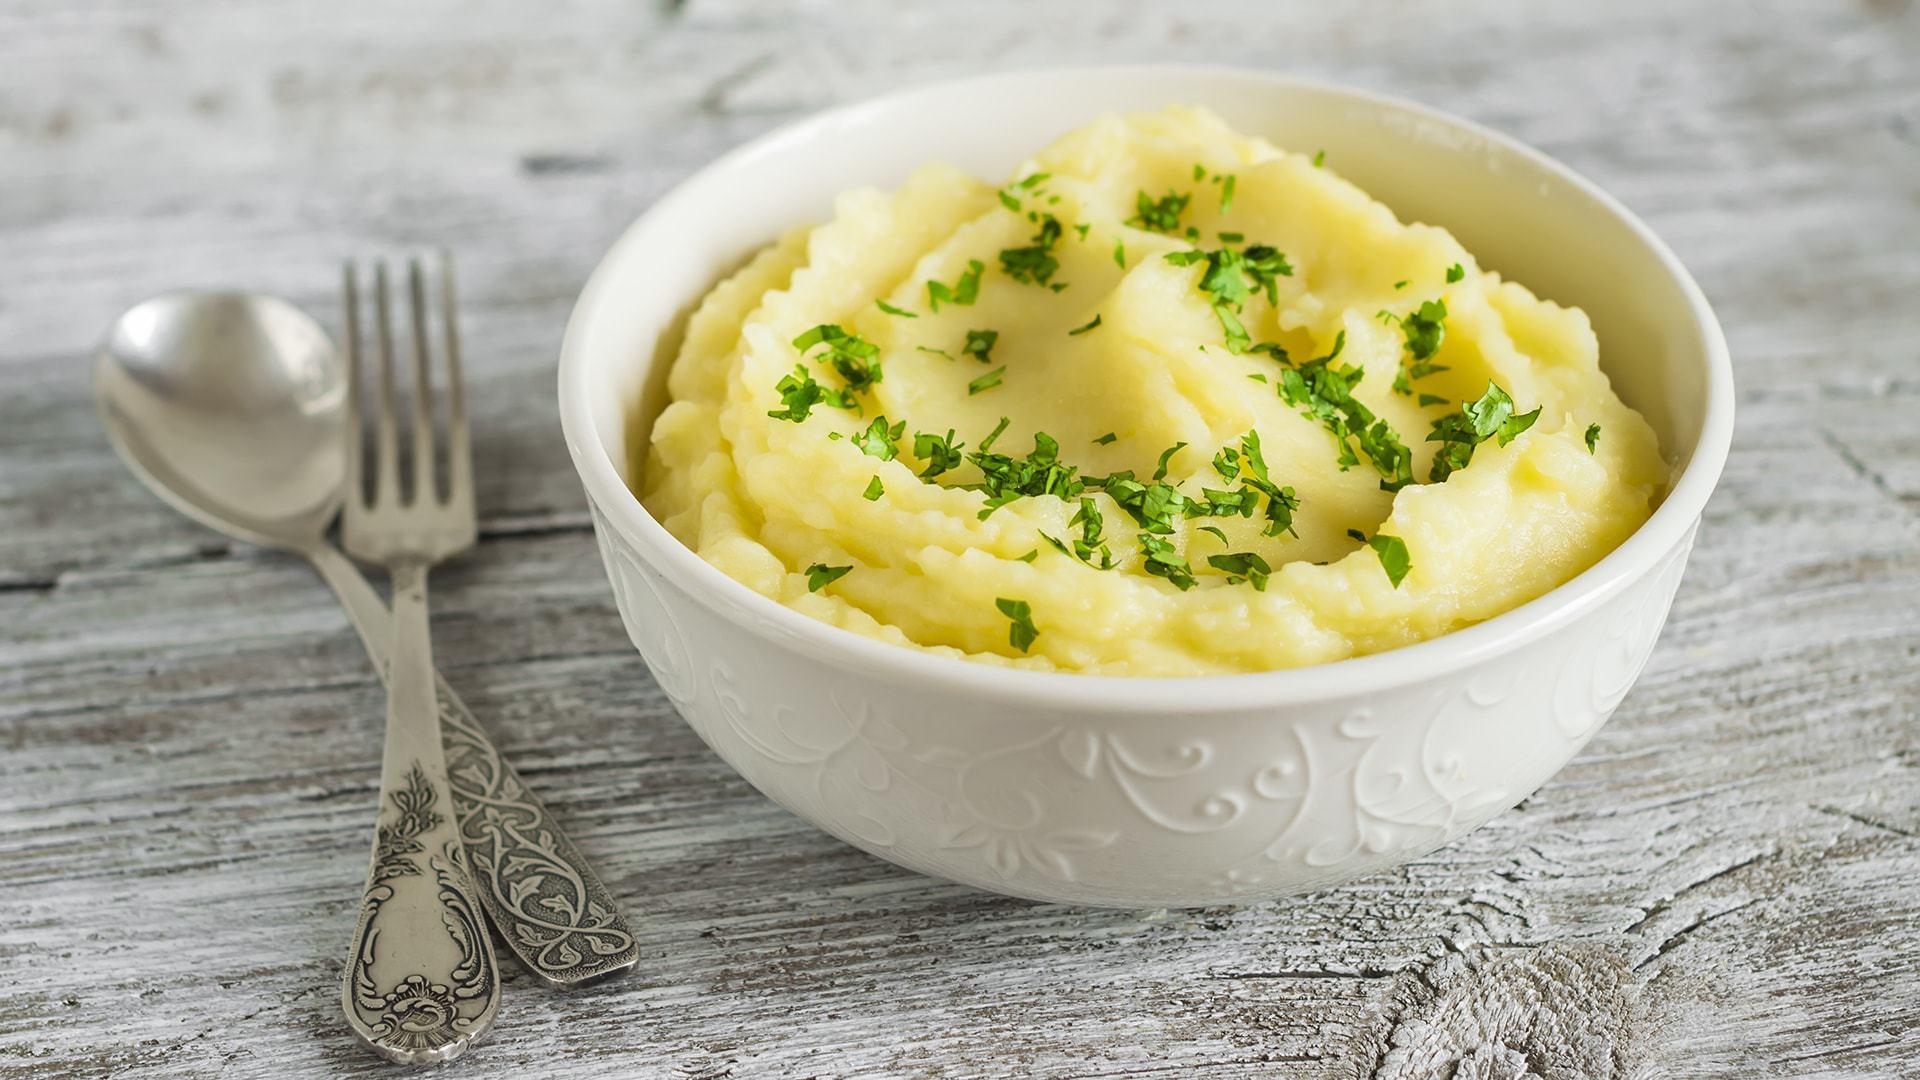 Mashed potatoes Recipe. Spoons of Spice